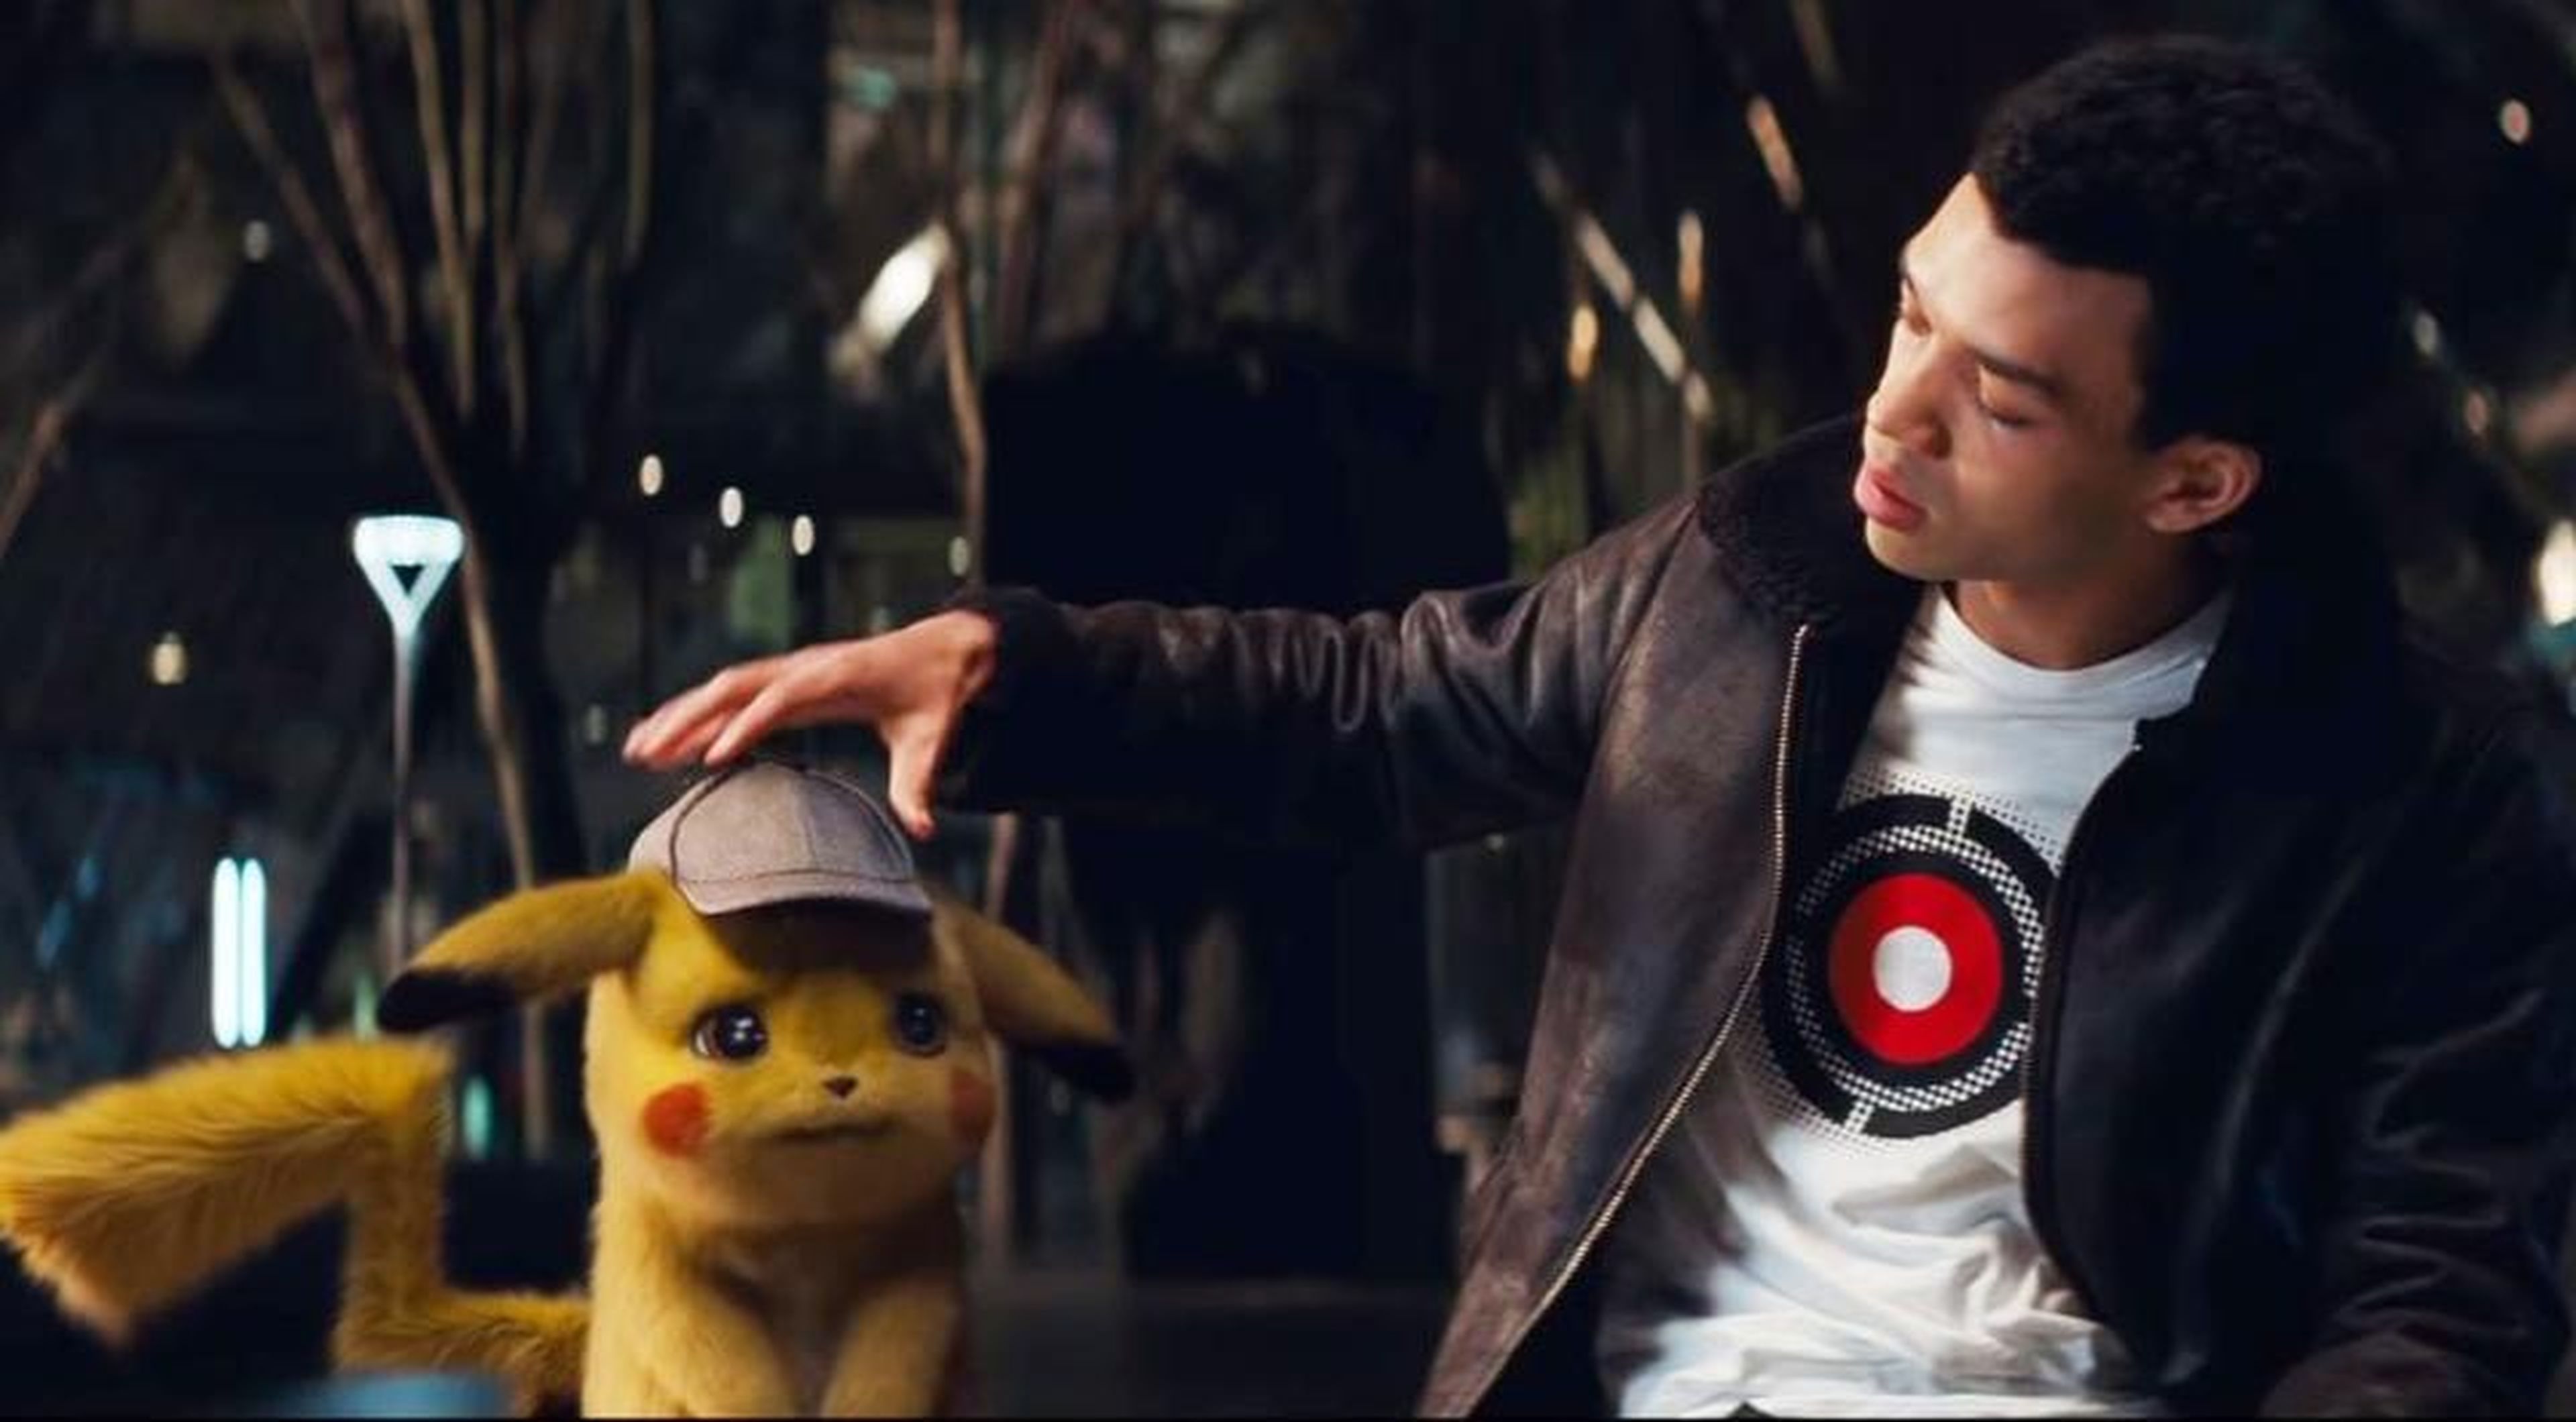 Justice Smith - Detective Pikachu